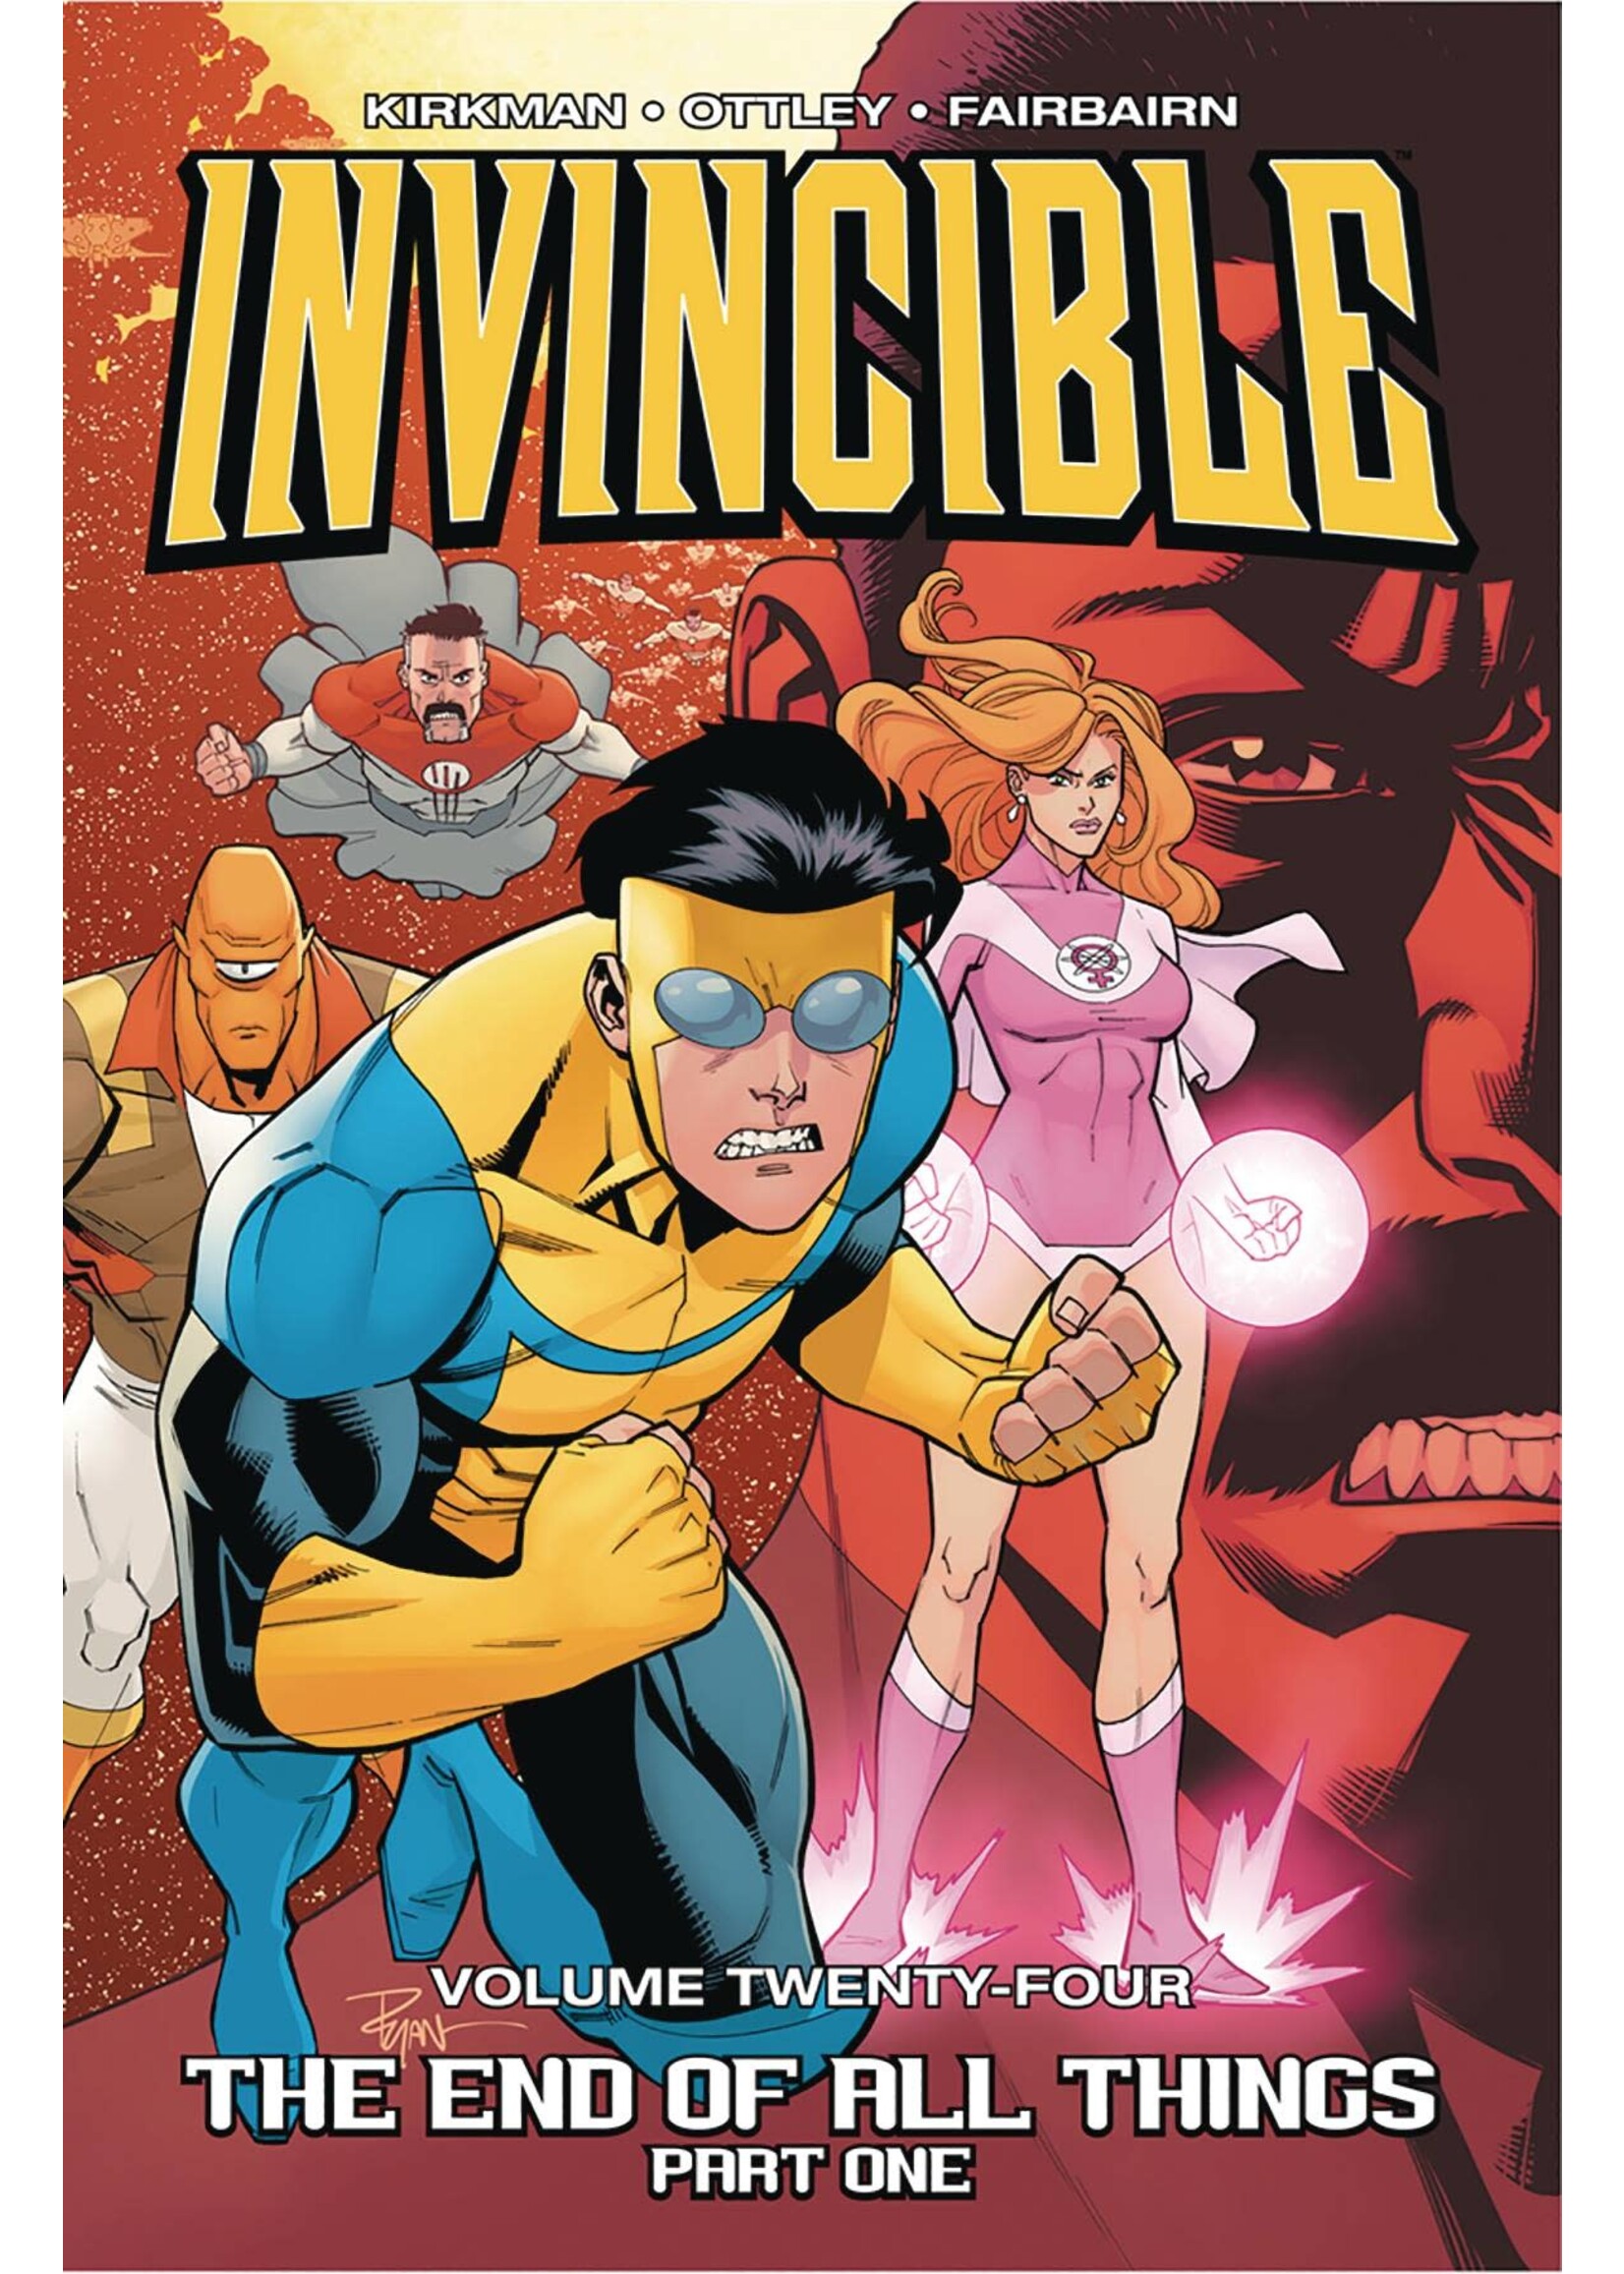 IMAGE COMICS INVINCIBLE TP VOL 24 END OF ALL THINGS PART 1 (MR)